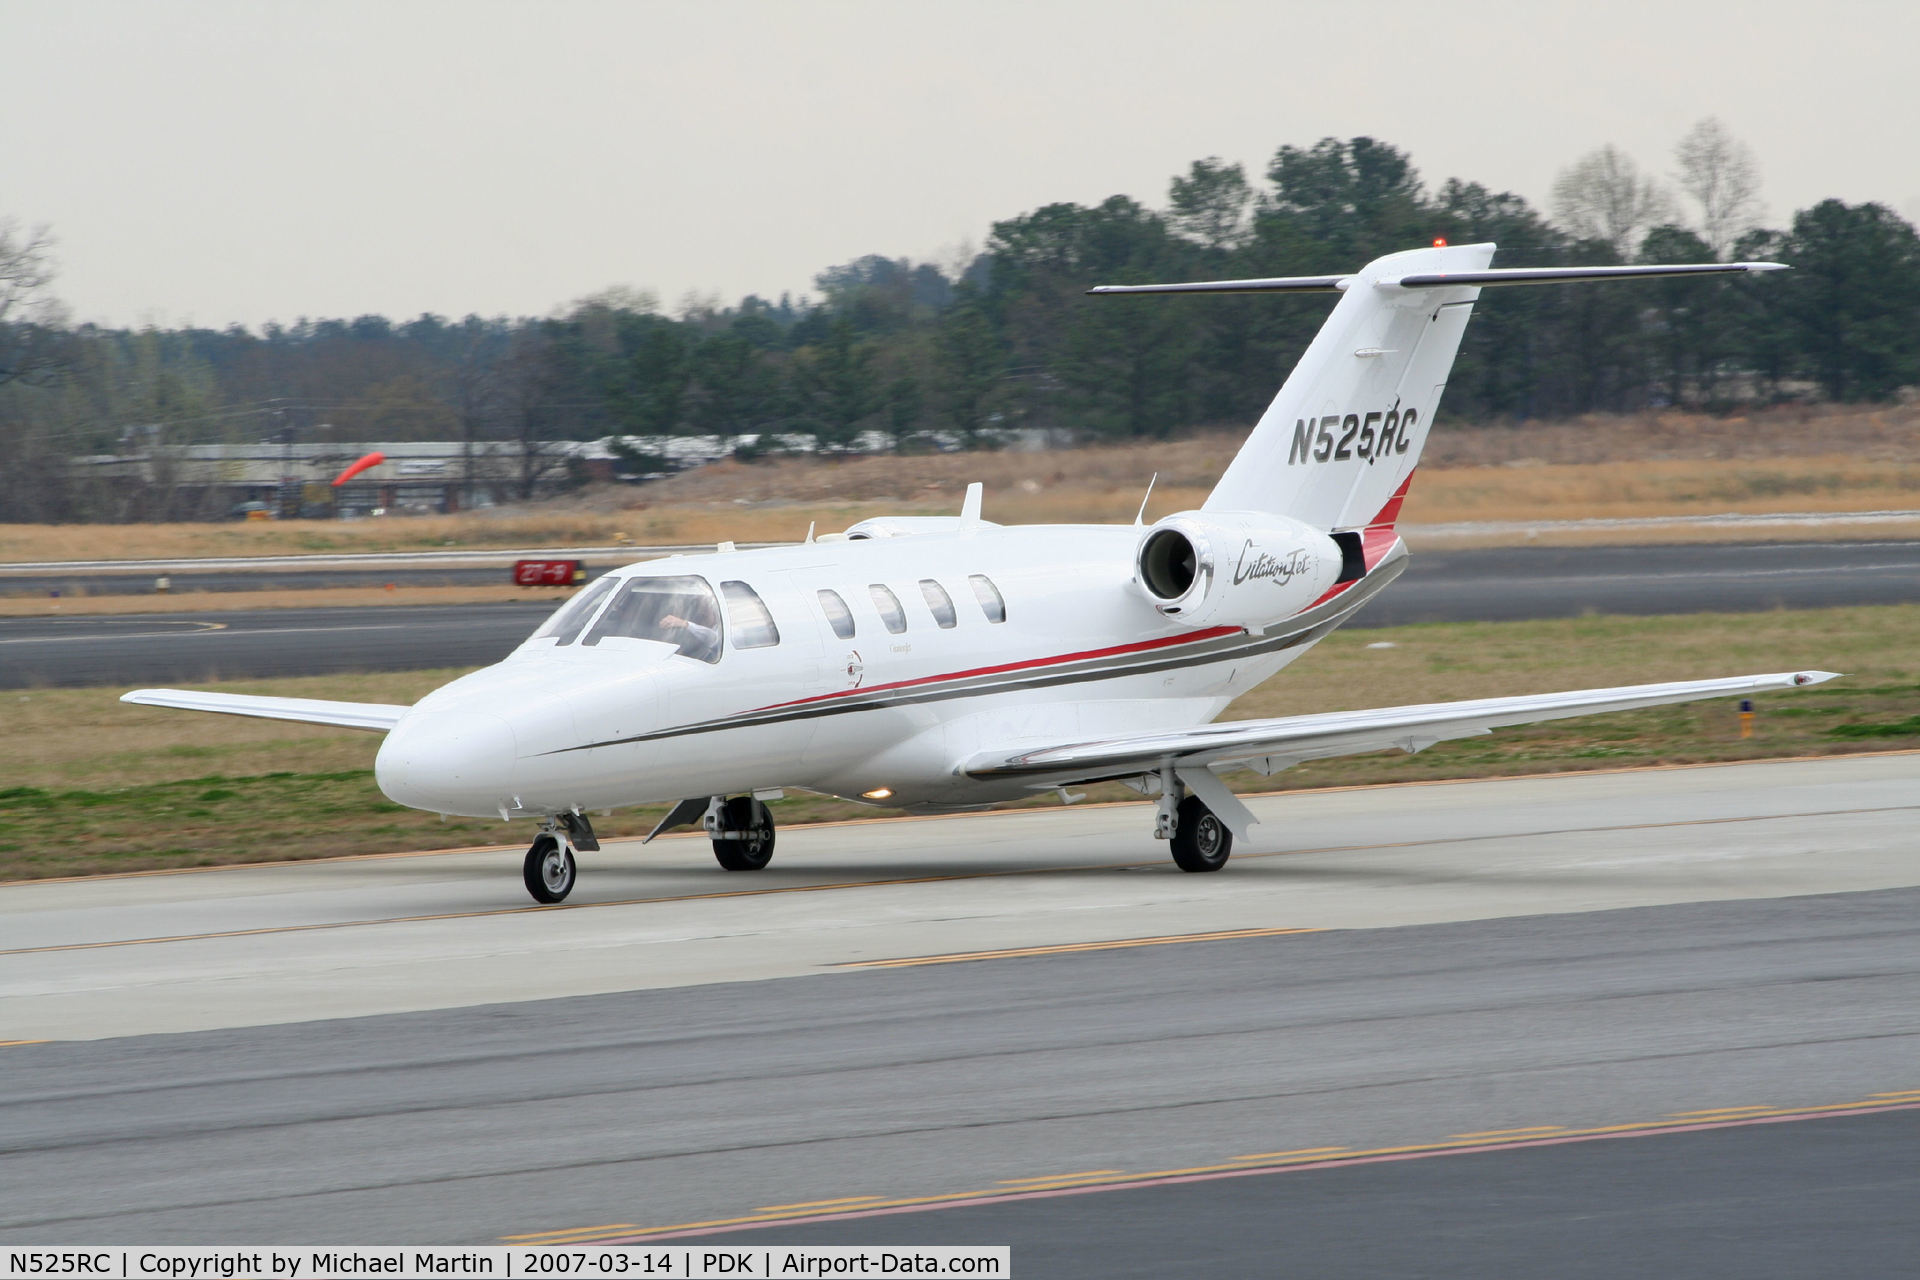 N525RC, 1997 Cessna 525 CitationJet CJ1 C/N 525-0178, Taxing to Epps Air Service